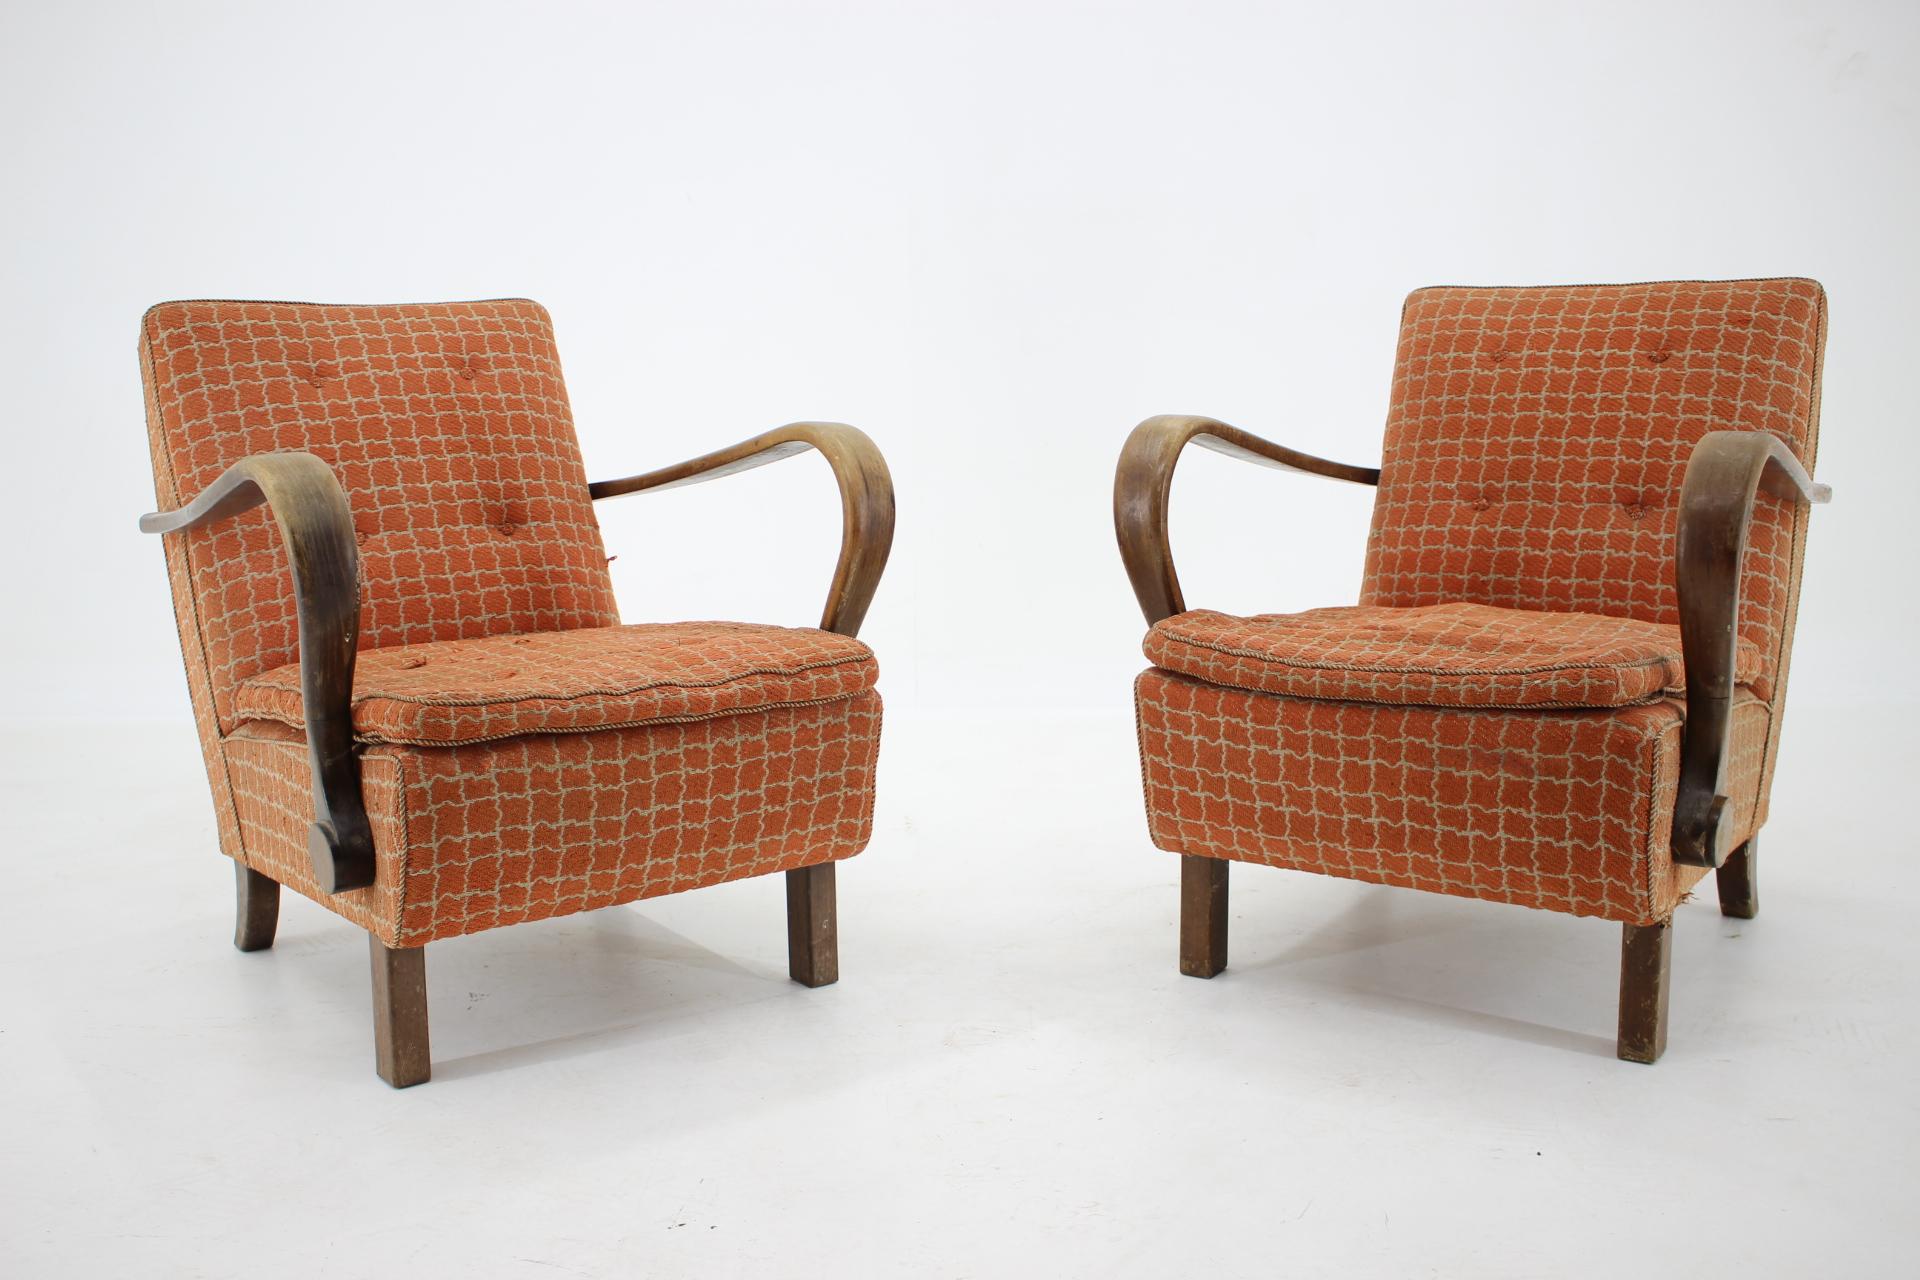 - Czechoslovakia, 1940s
- good original condition suitable for new upholstery
- publicated in literature (see the photos)
        